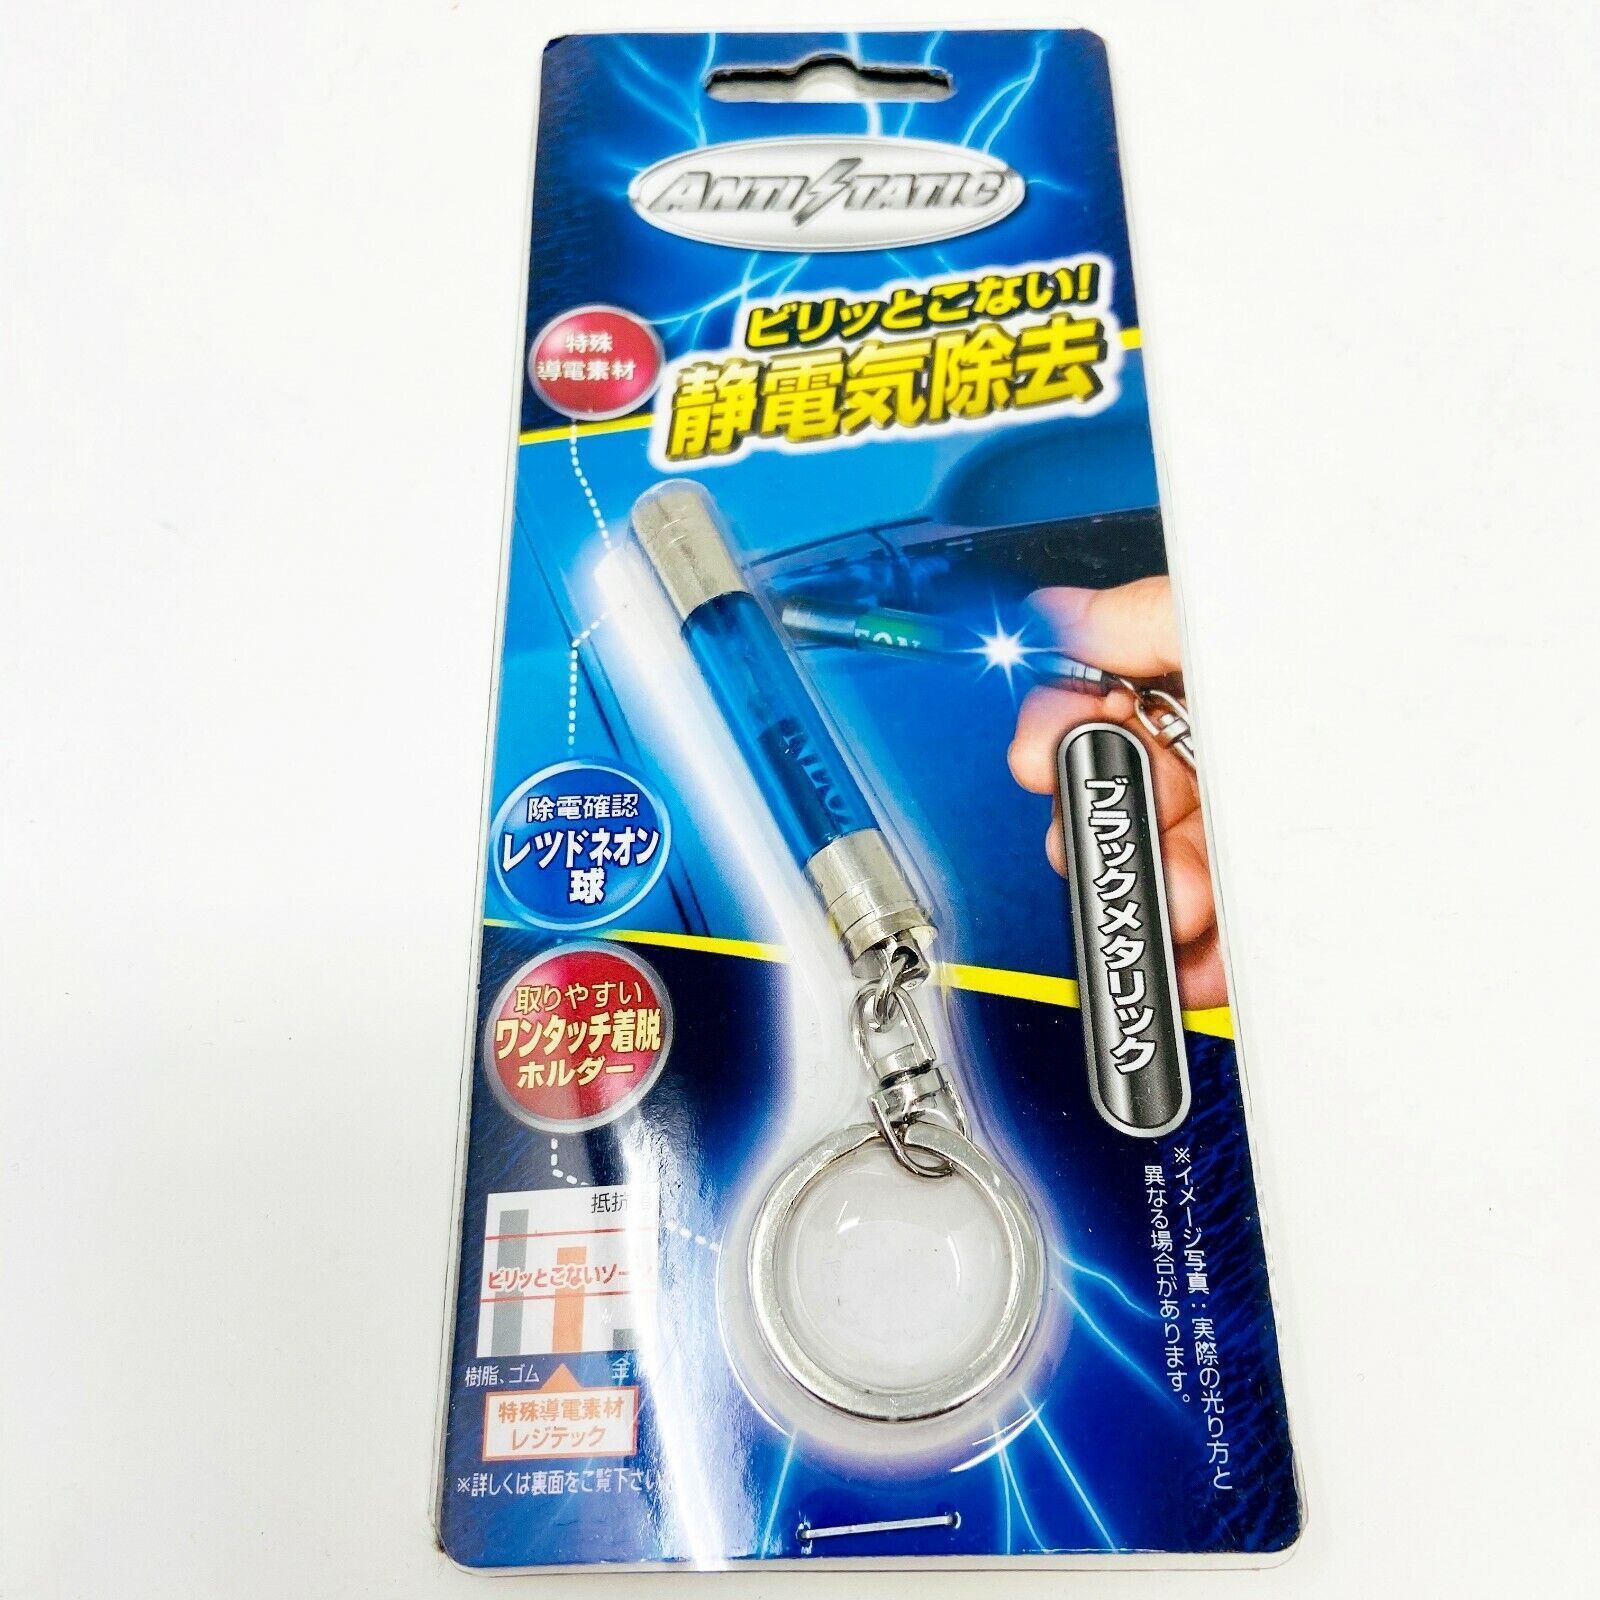 Anti Static Electricity Eliminator Remover Blue Compact Key Chain 